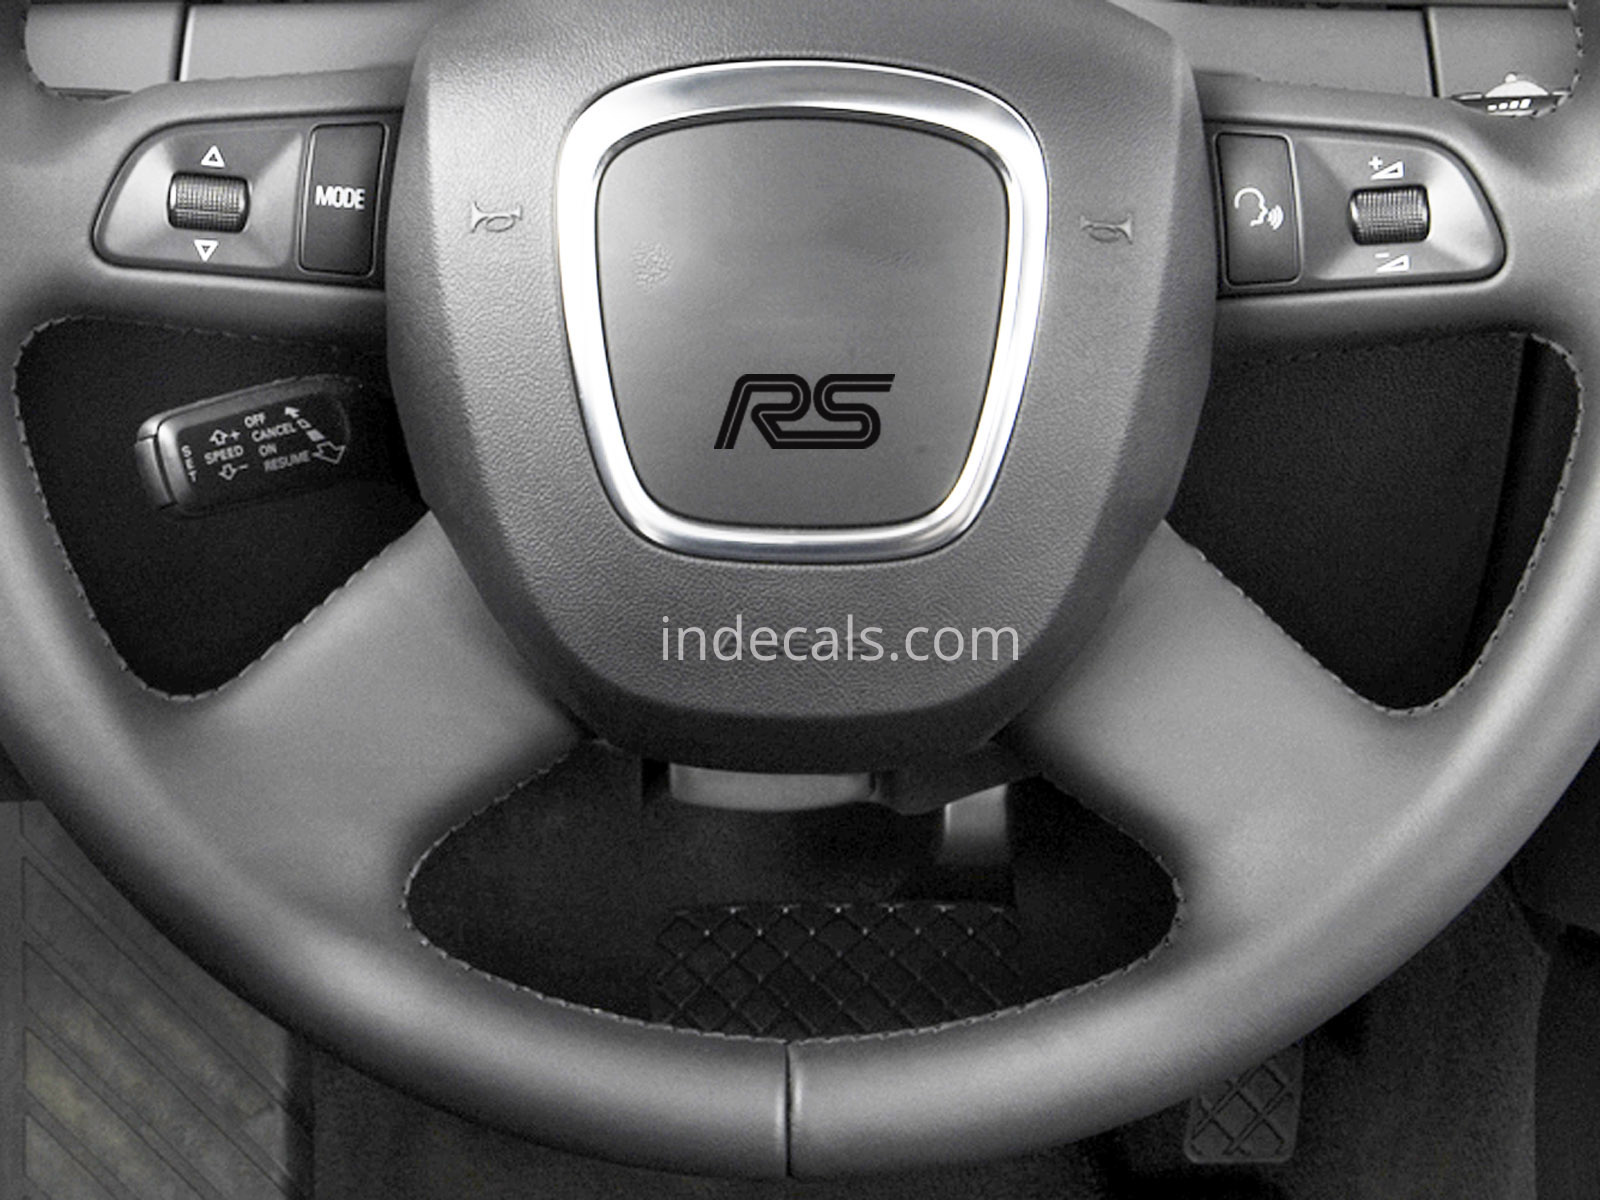 3 x Ford RS Stickers for Steering Wheel - Black